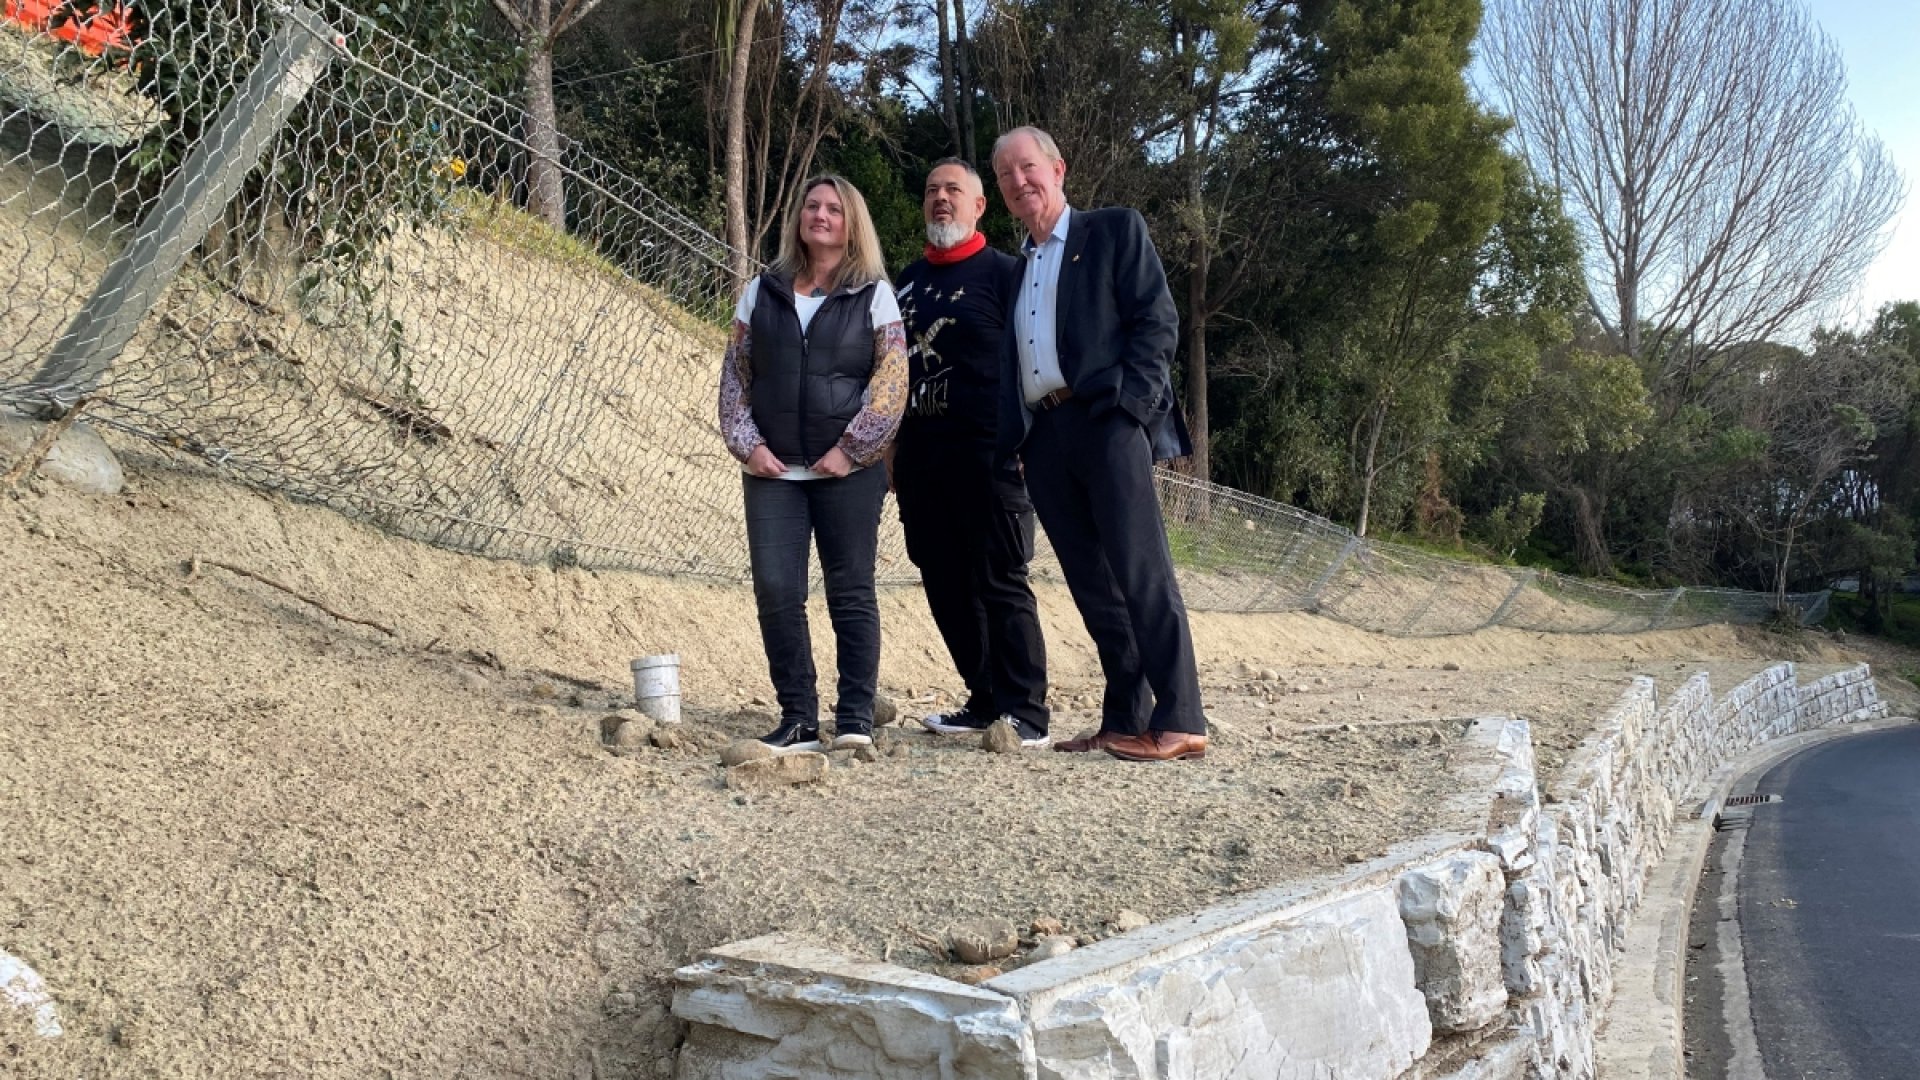 Members of the Nelson City Council Storm Recovery Taskforce Councillor Trudie Brand, Councillor Matty Anderson and Mayor Nick Smith inspect the rockfall protection fence and block retaining wall along Moana Avenue.